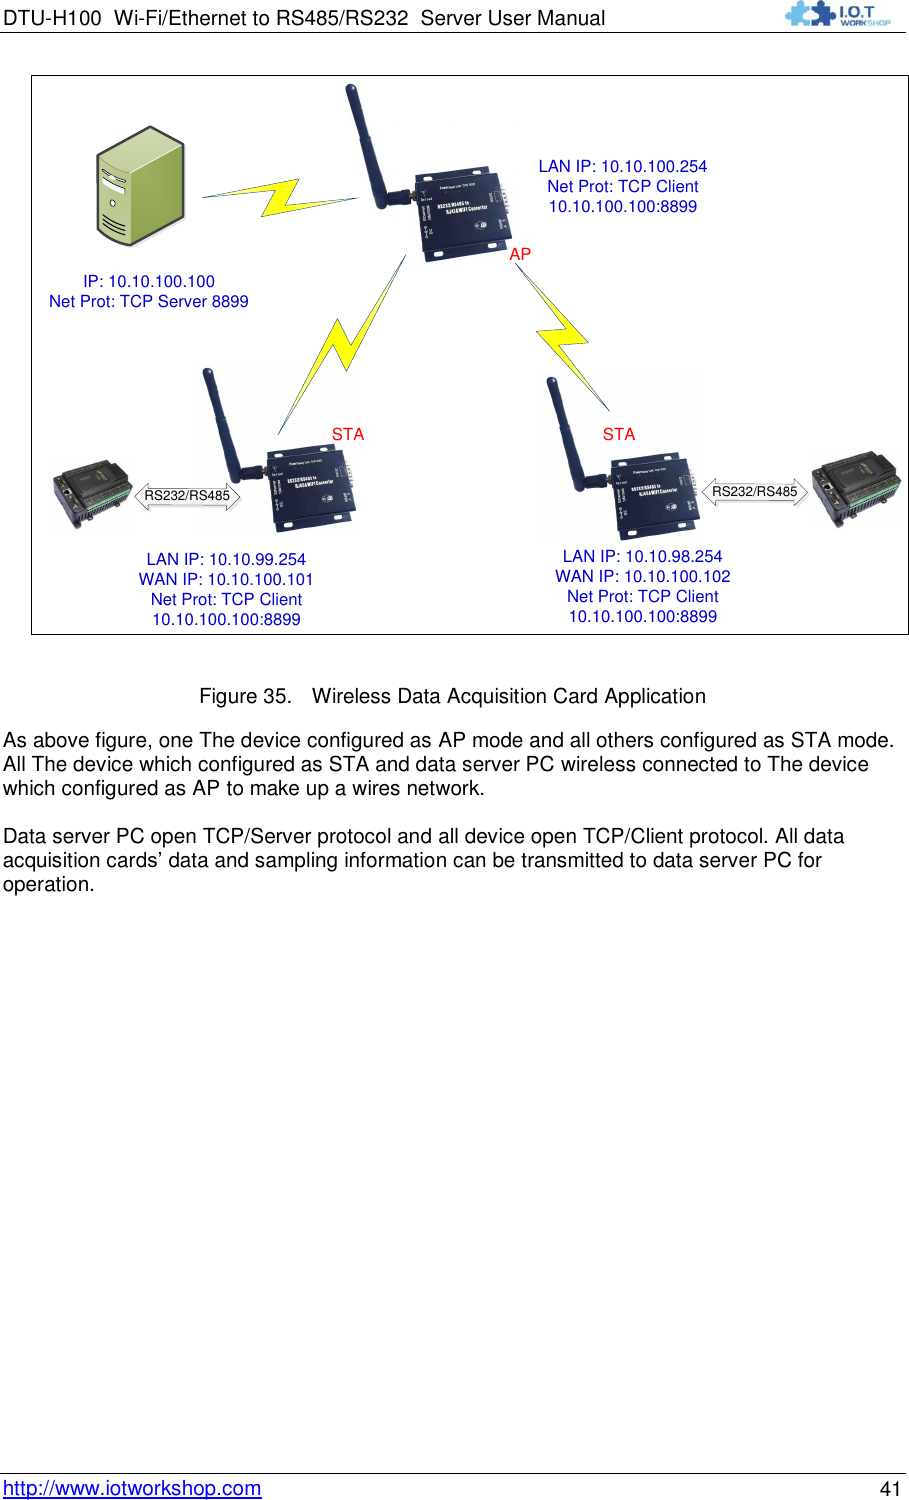 DTU-H100 Wi-Fi/Ethernet to RS485/RS232  Server User Manual    http://www.iotworkshop.com 41 RS232/RS485LAN IP: 10.10.99.254WAN IP: 10.10.100.101Net Prot: TCP Client 10.10.100.100:8899APSTARS232/RS485STALAN IP: 10.10.98.254WAN IP: 10.10.100.102Net Prot: TCP Client 10.10.100.100:8899LAN IP: 10.10.100.254Net Prot: TCP Client 10.10.100.100:8899IP: 10.10.100.100Net Prot: TCP Server 8899 Figure 35. Wireless Data Acquisition Card Application As above figure, one The device configured as AP mode and all others configured as STA mode. All The device which configured as STA and data server PC wireless connected to The device which configured as AP to make up a wires network.  Data server PC open TCP/Server protocol and all device open TCP/Client protocol. All data acquisition cards‟ data and sampling information can be transmitted to data server PC for operation.  